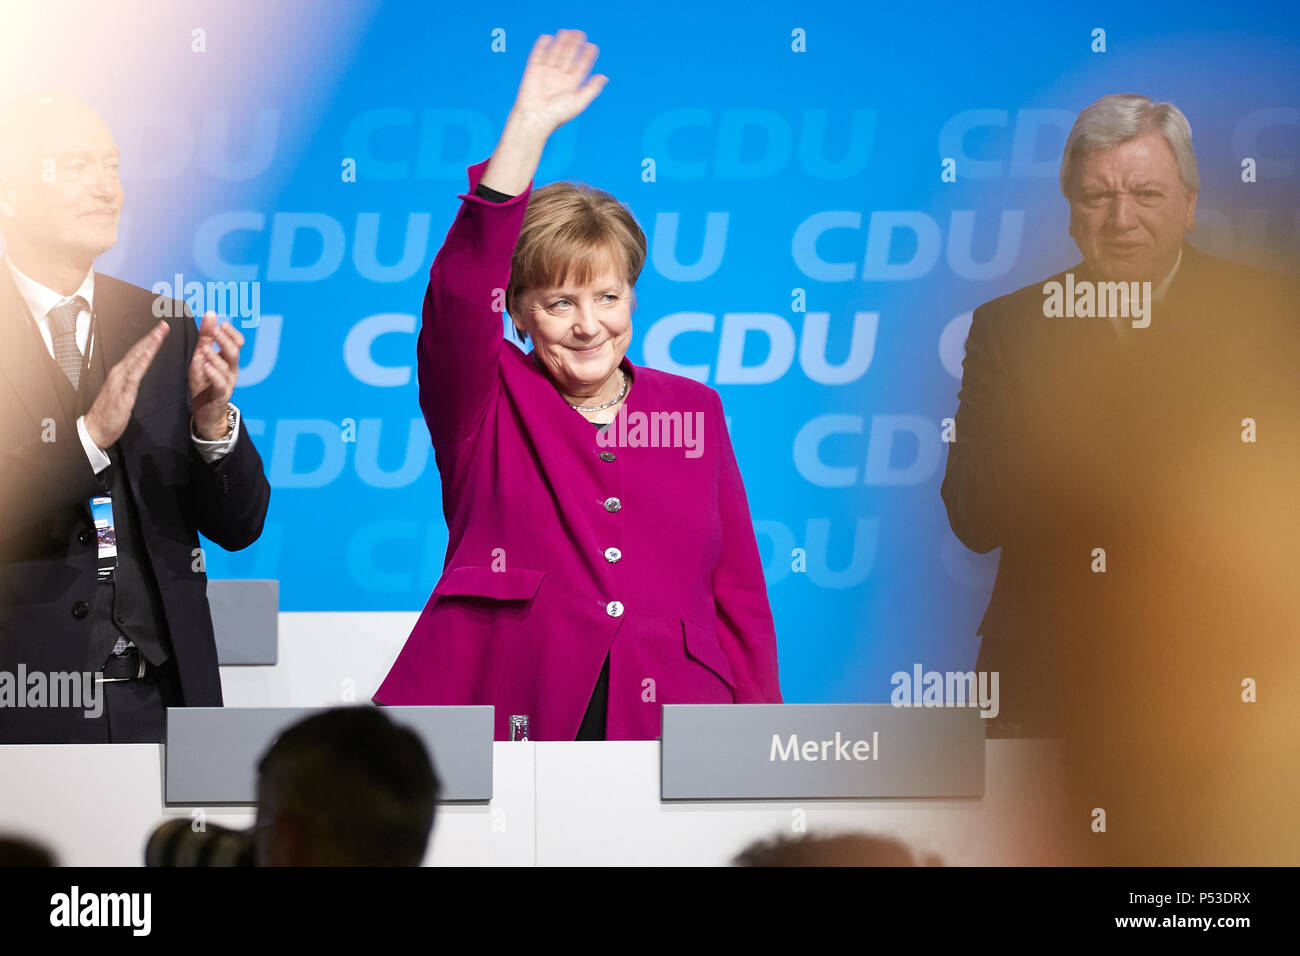 Berlin, Germany - The party leader Angela Merkel at the 30th Federal Party Congress of the CDU standing on the podium with a gesture of thanks. Stock Photo